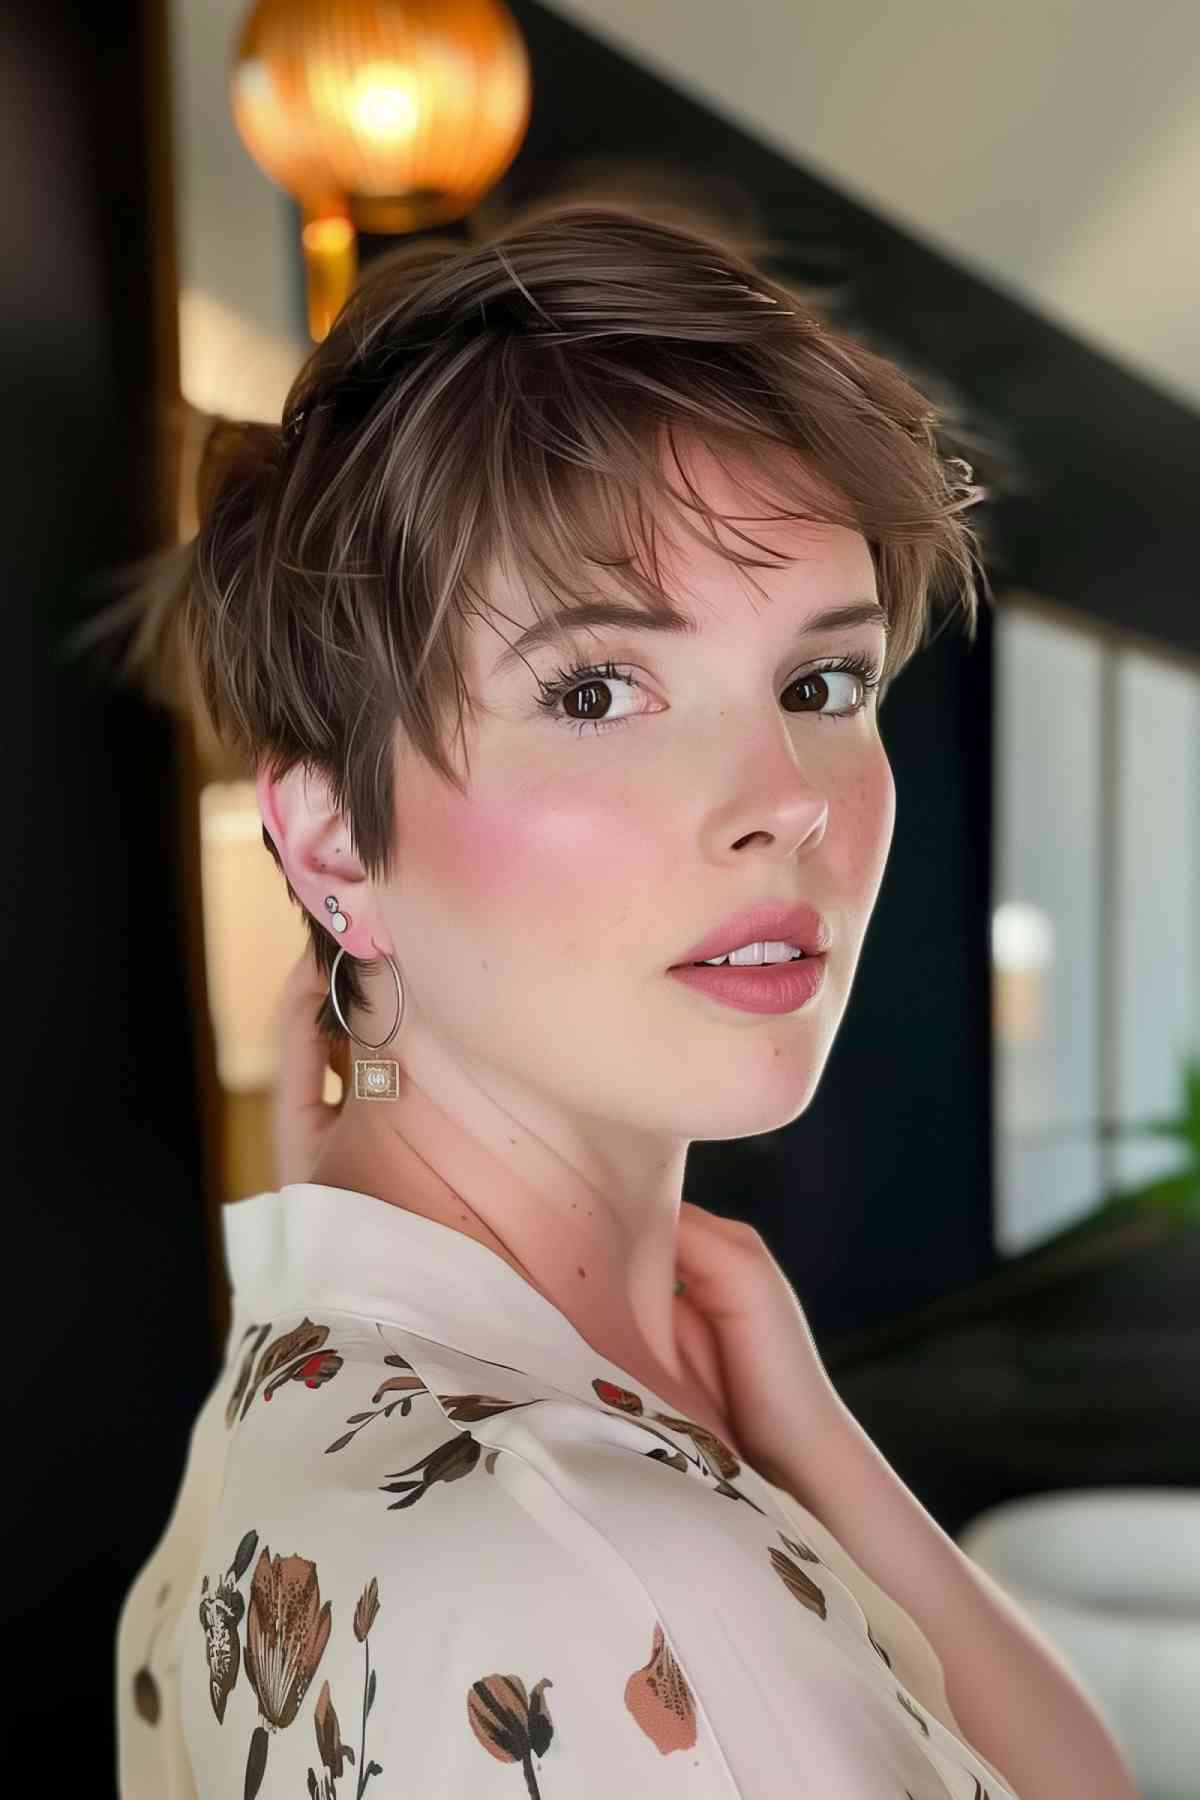 Elegant young woman with a short layered choppy pixie cut and side-swept fringe in a chic interior